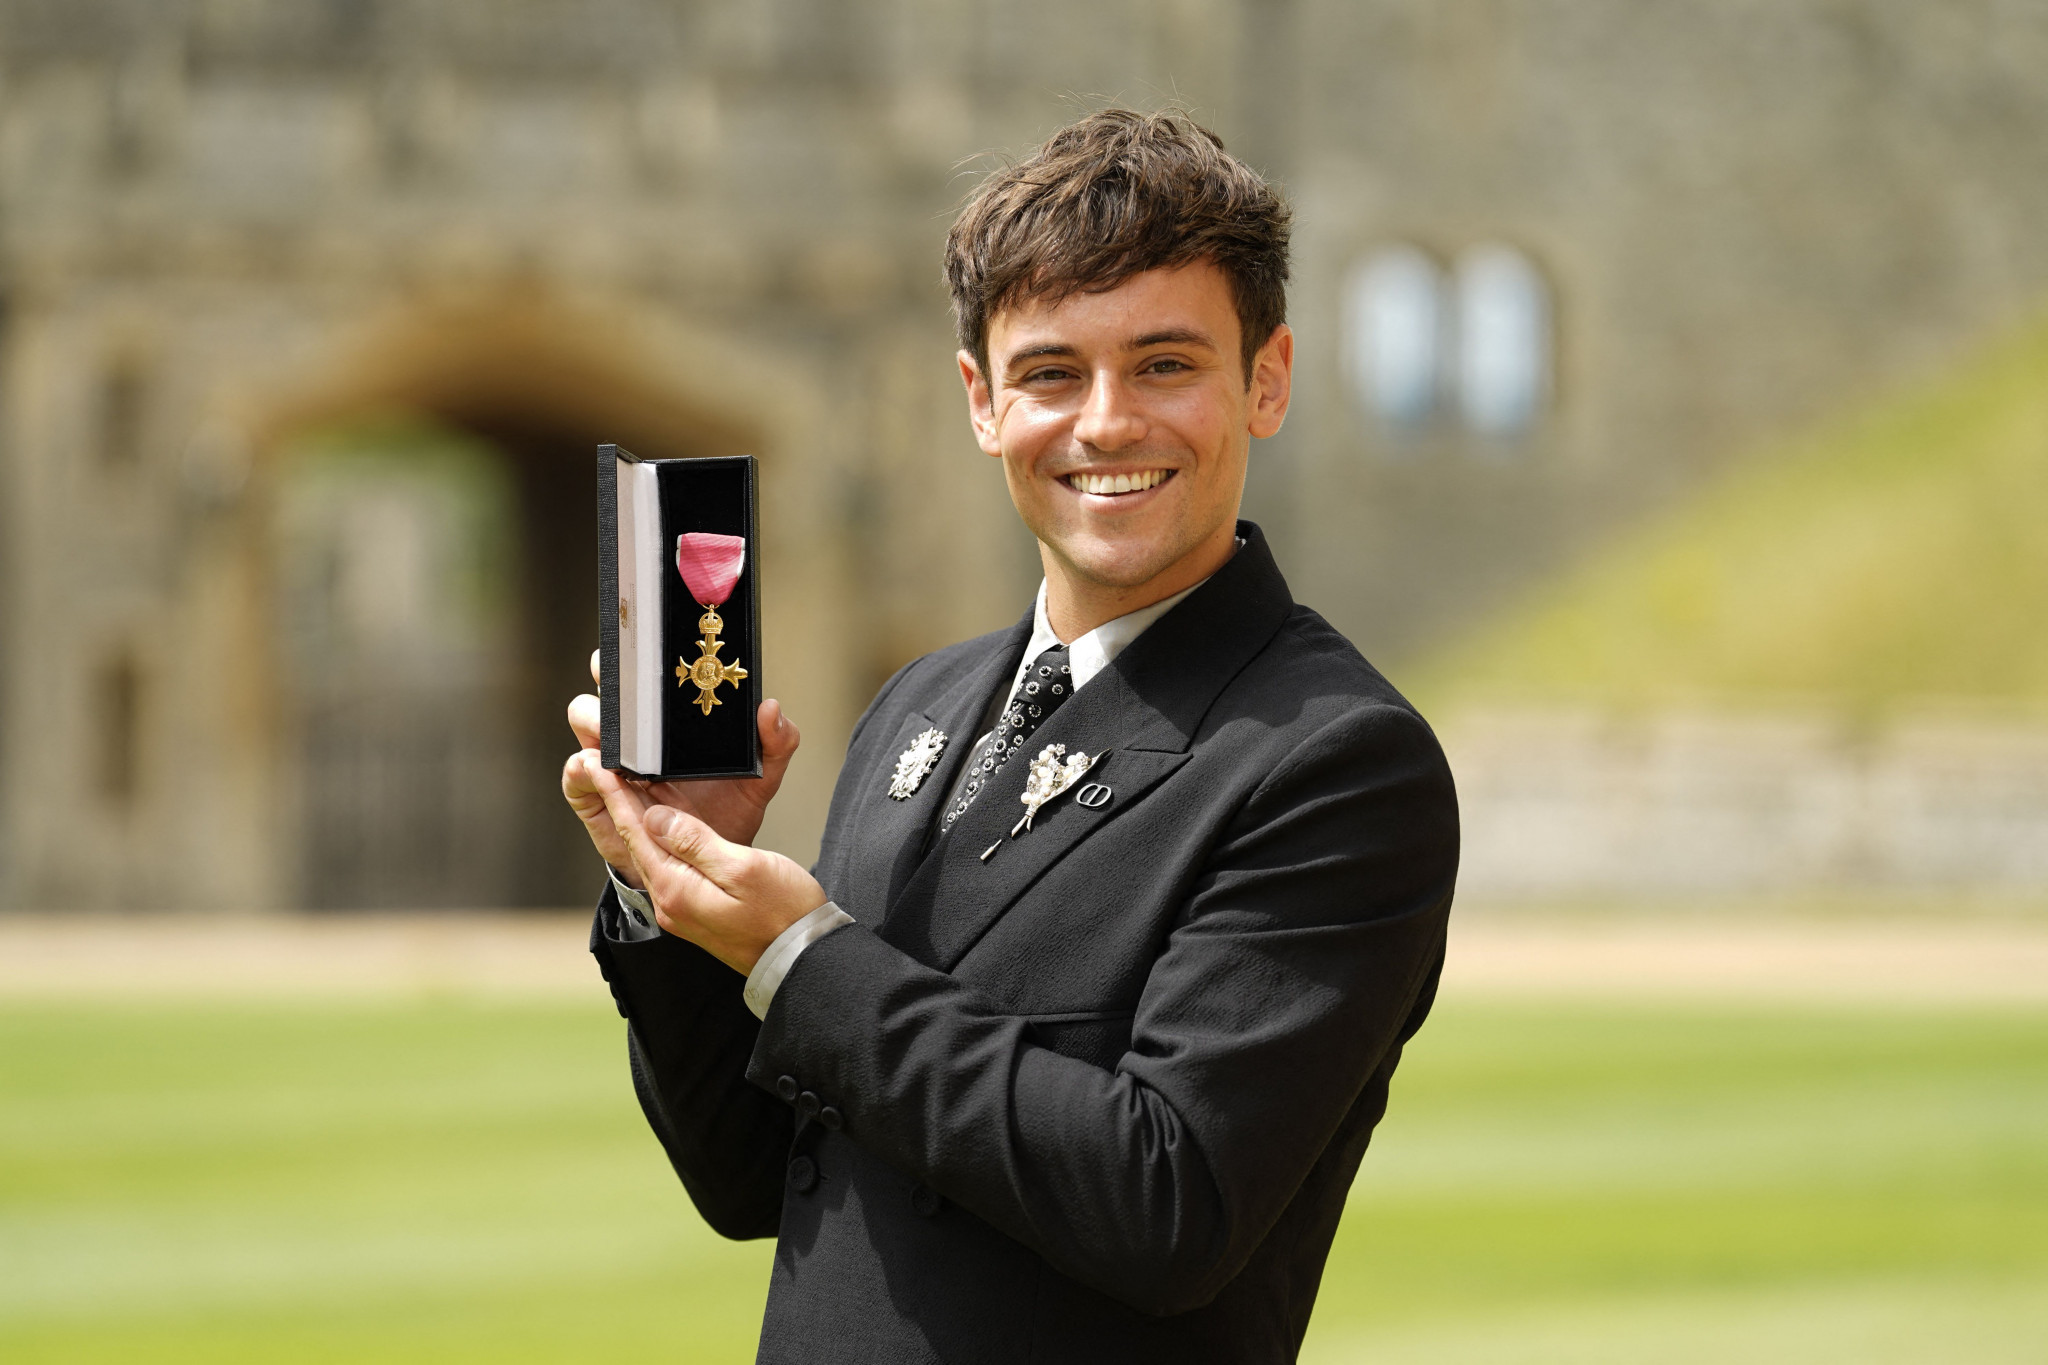 Tom Daley received the insignia of Order of the British Empire earlier this month ©Getty Images